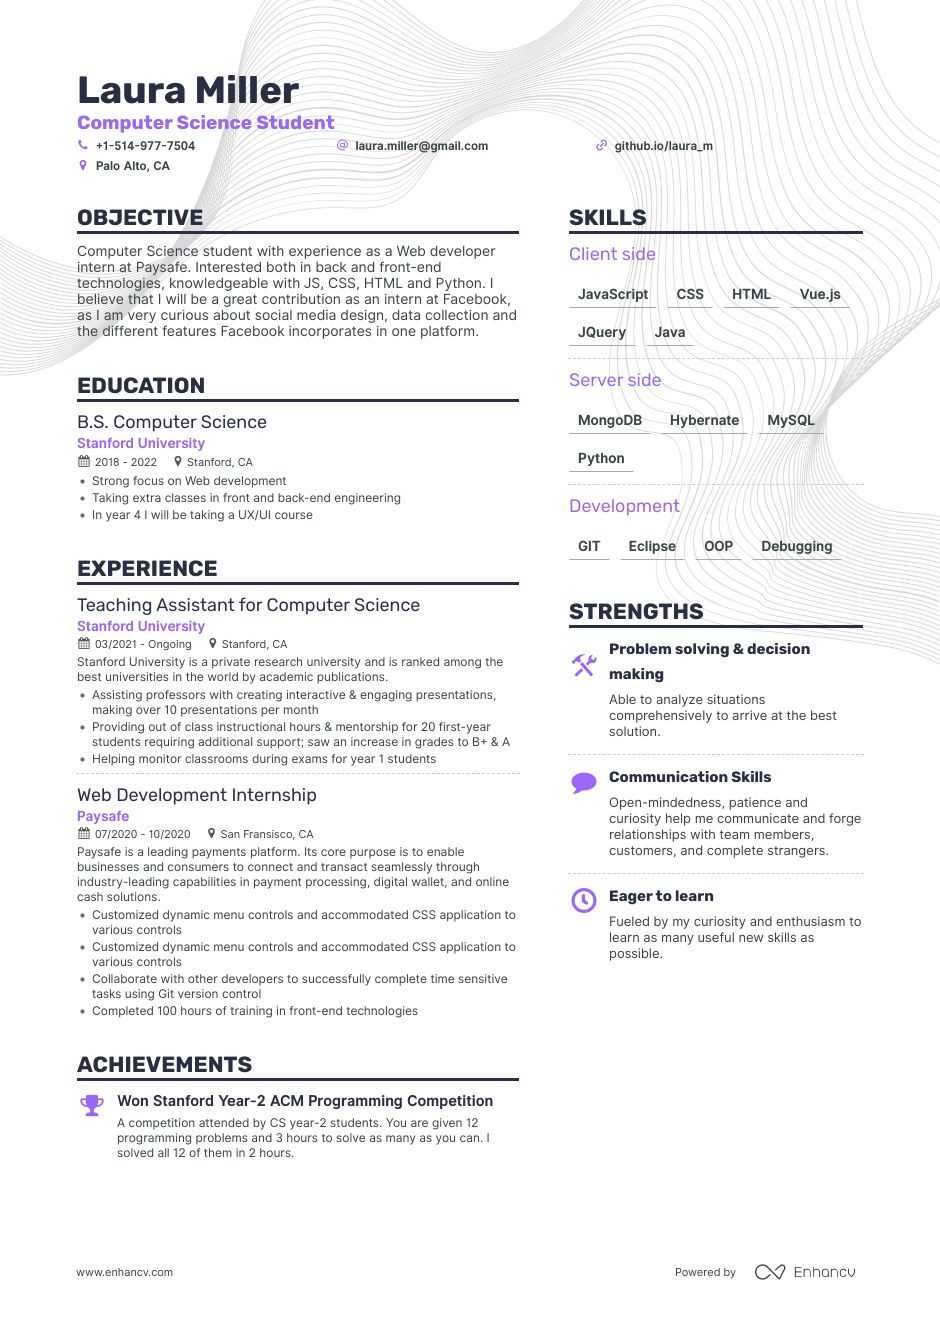 Resume Samples for Btech Cse Students Computer Science Resume Examples & Guide for 2021